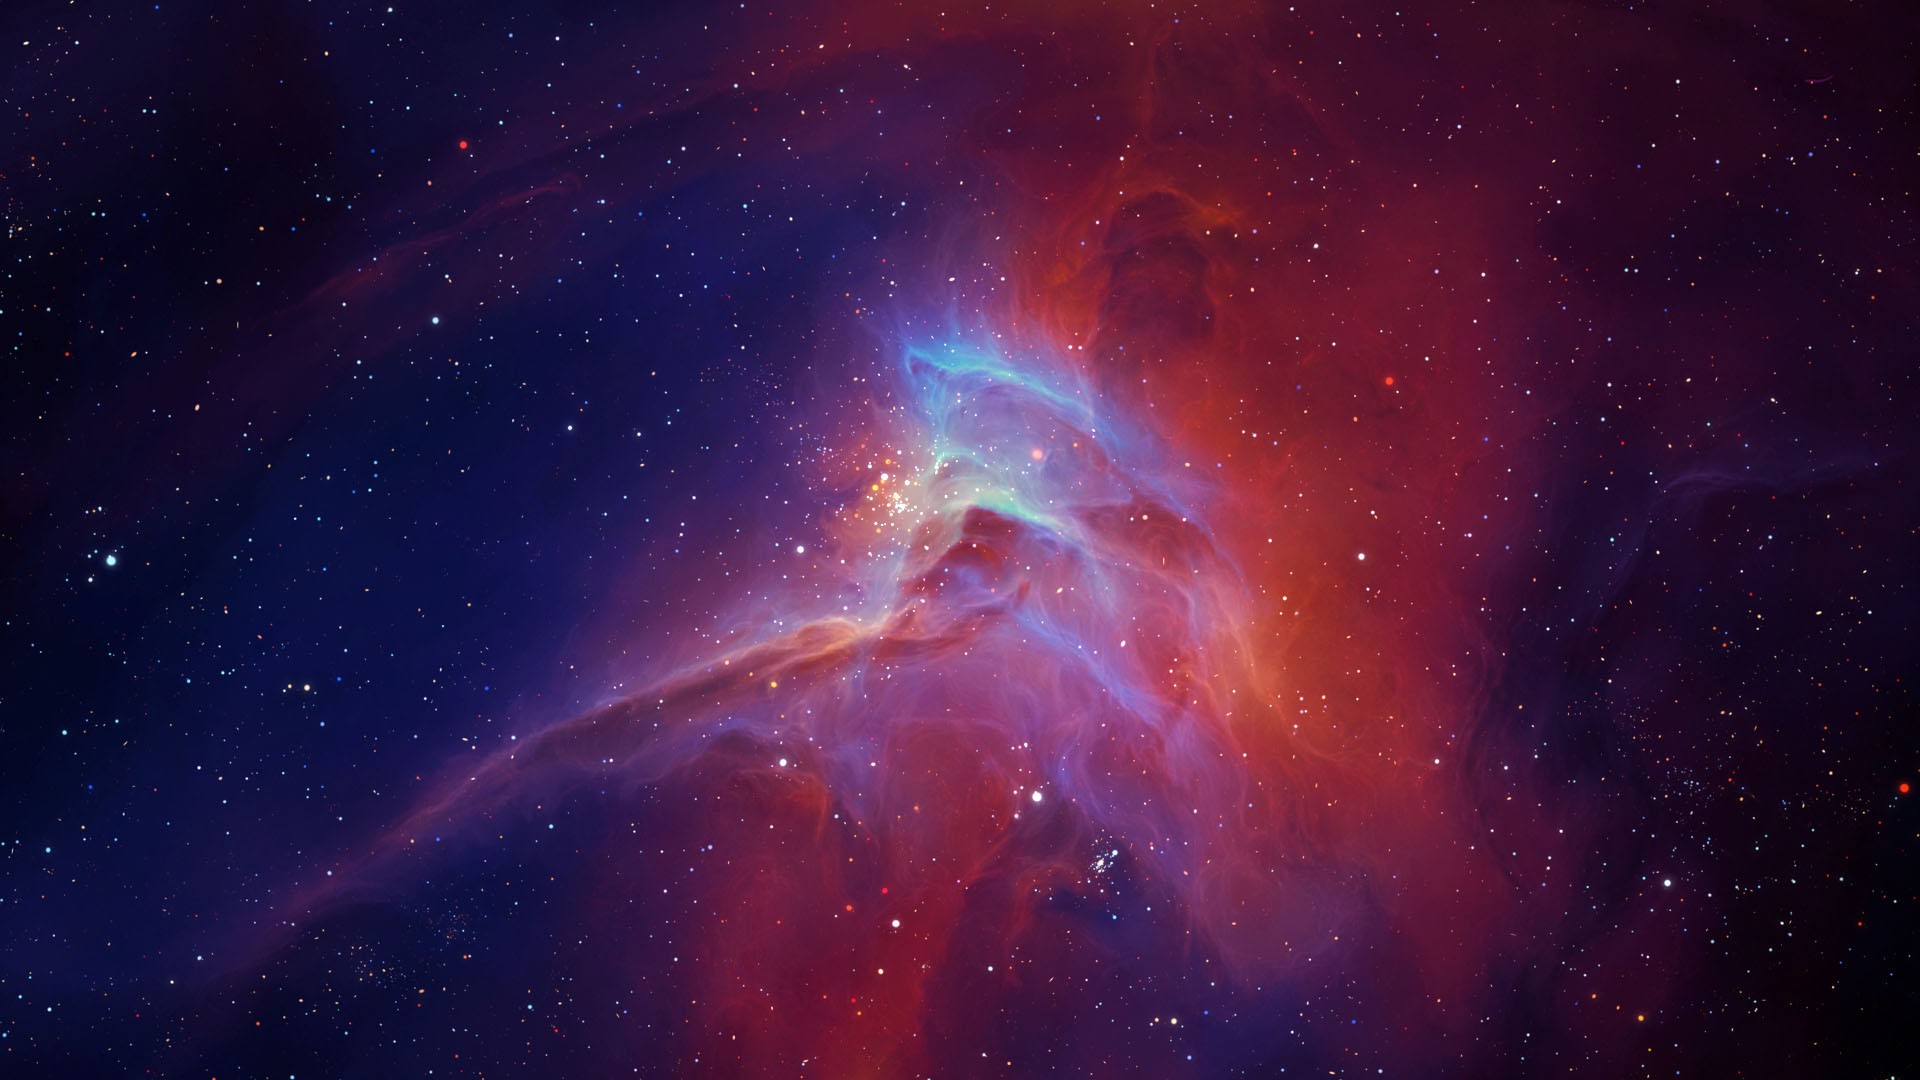 69+ Real Space wallpapers ·① Download free stunning backgrounds for